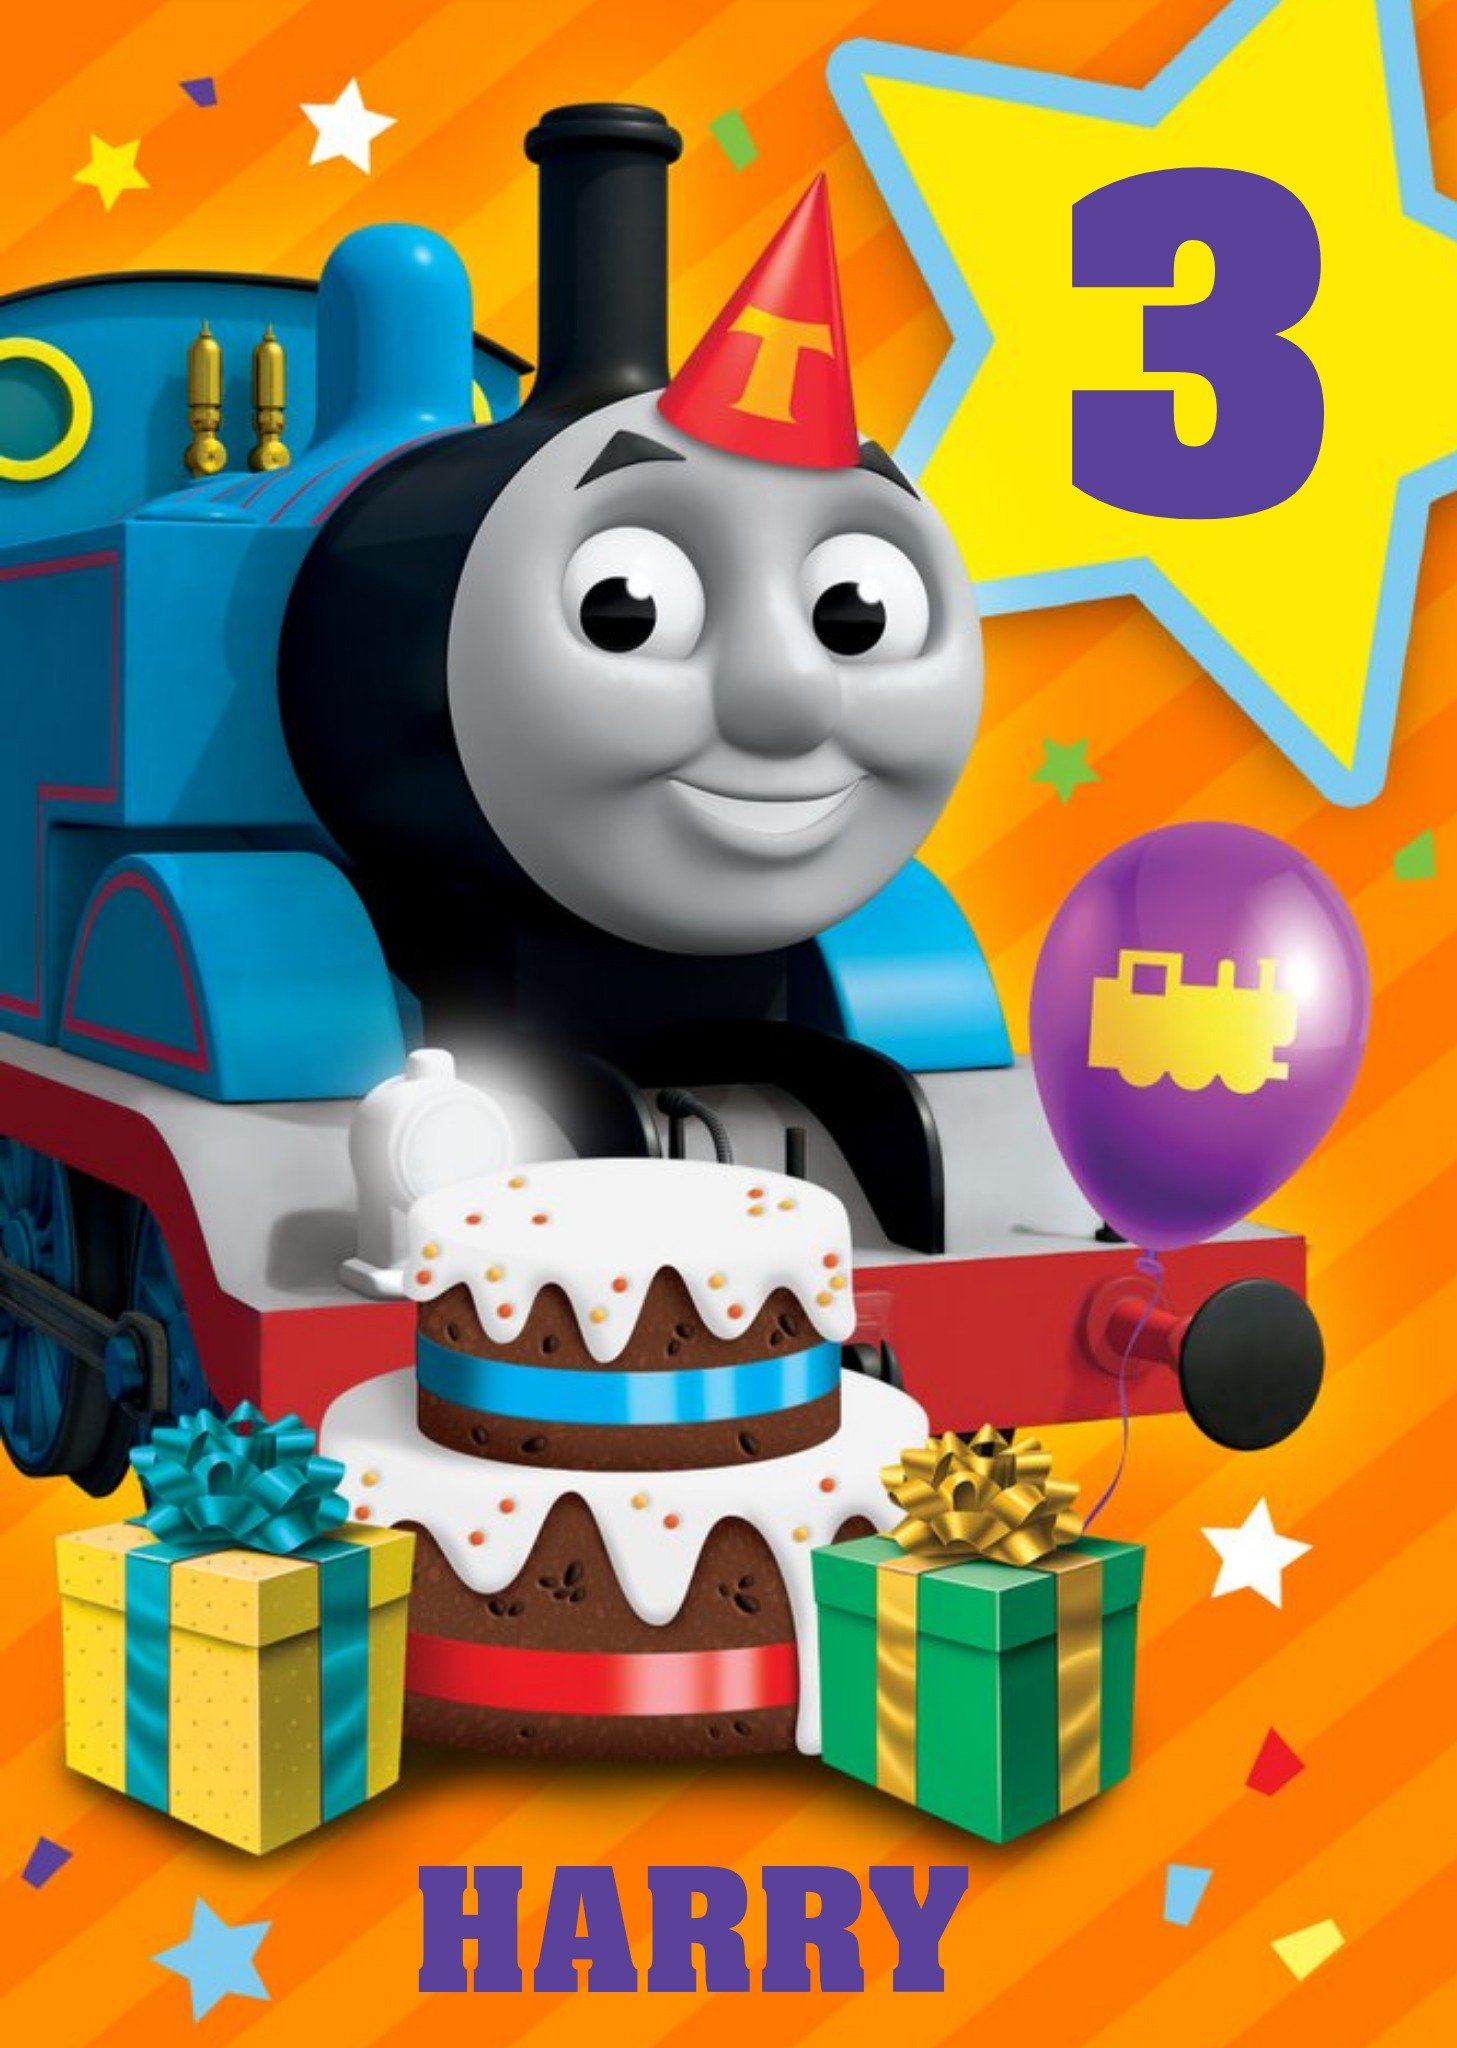 Thomas & Friends Thomas And Friends Cake And Presents Birthday Card Ecard